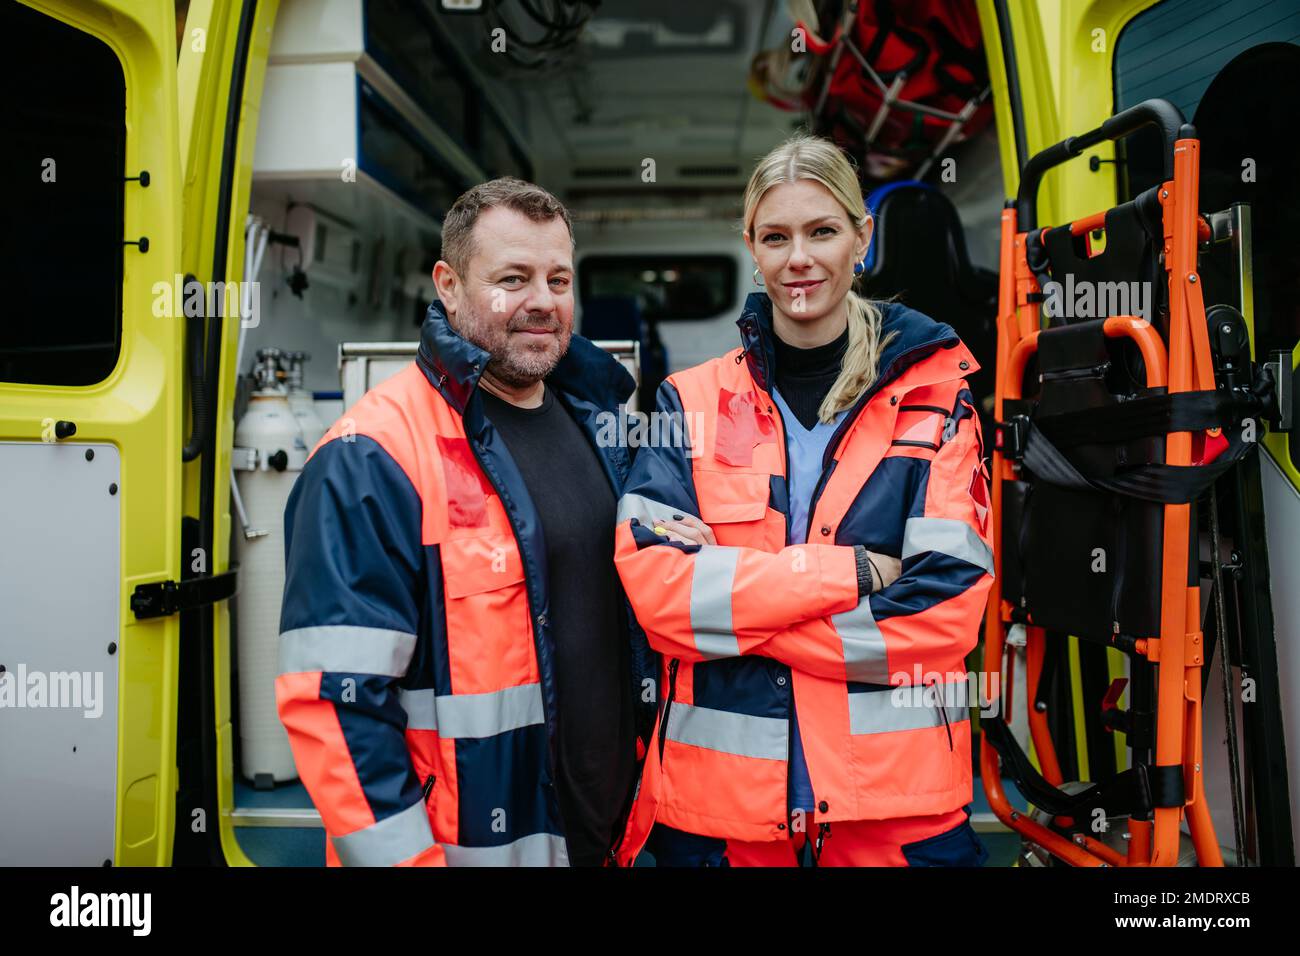 Portrait of rescuers in front of ambulance car. Stock Photo